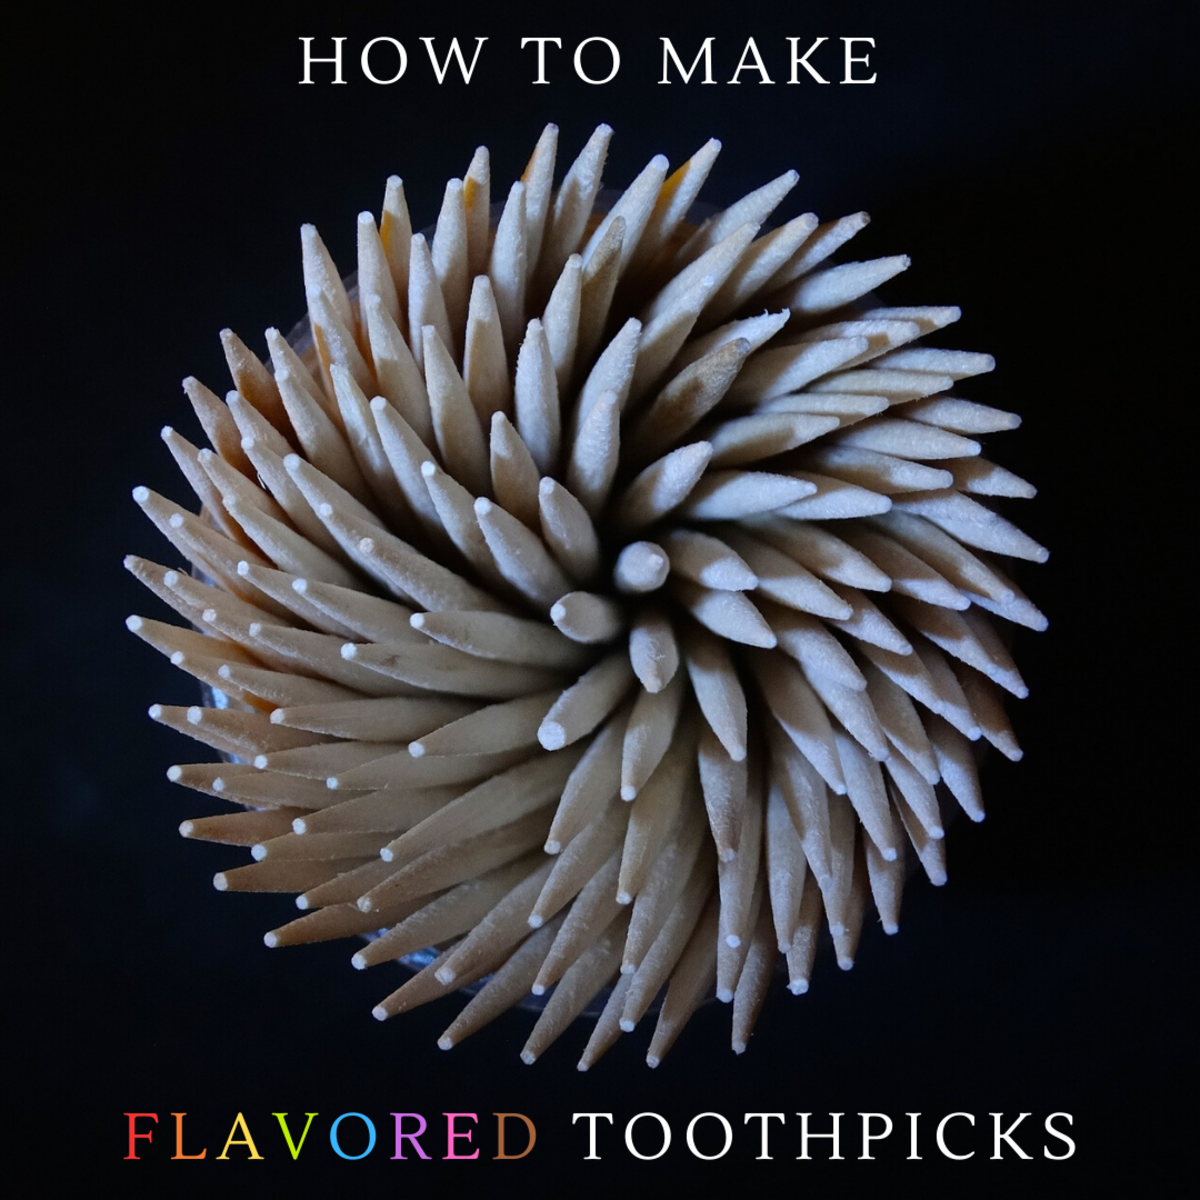 How to Make Flavored Toothpicks